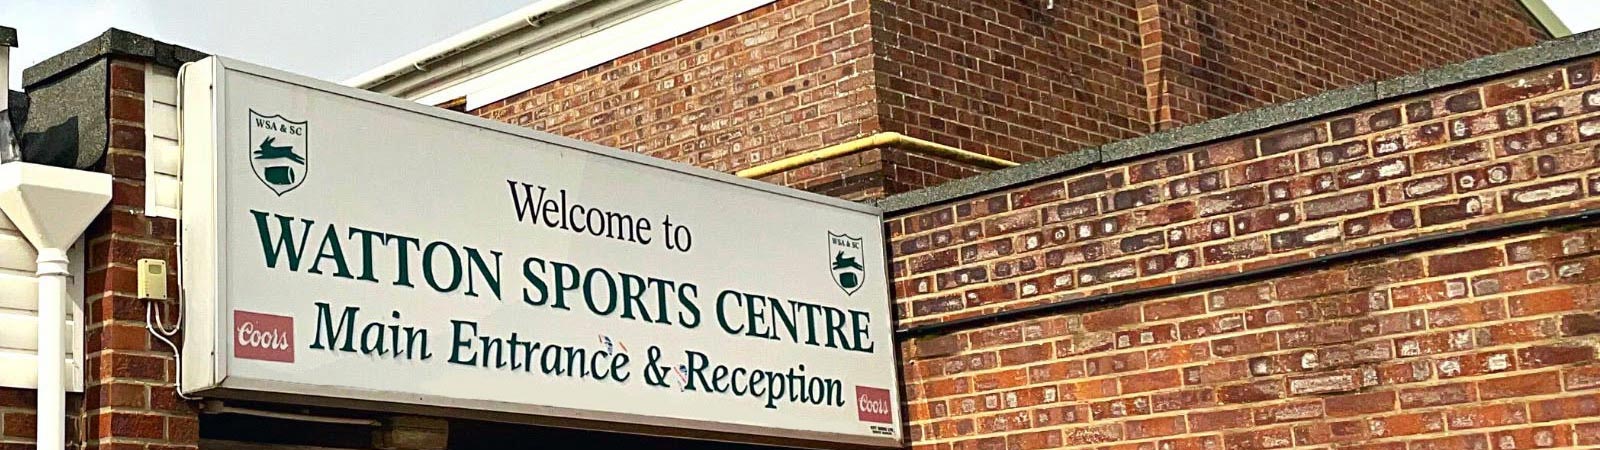 Find out more about our outstanding sports, recreation, gym and leisure facilities, its origins, and history.